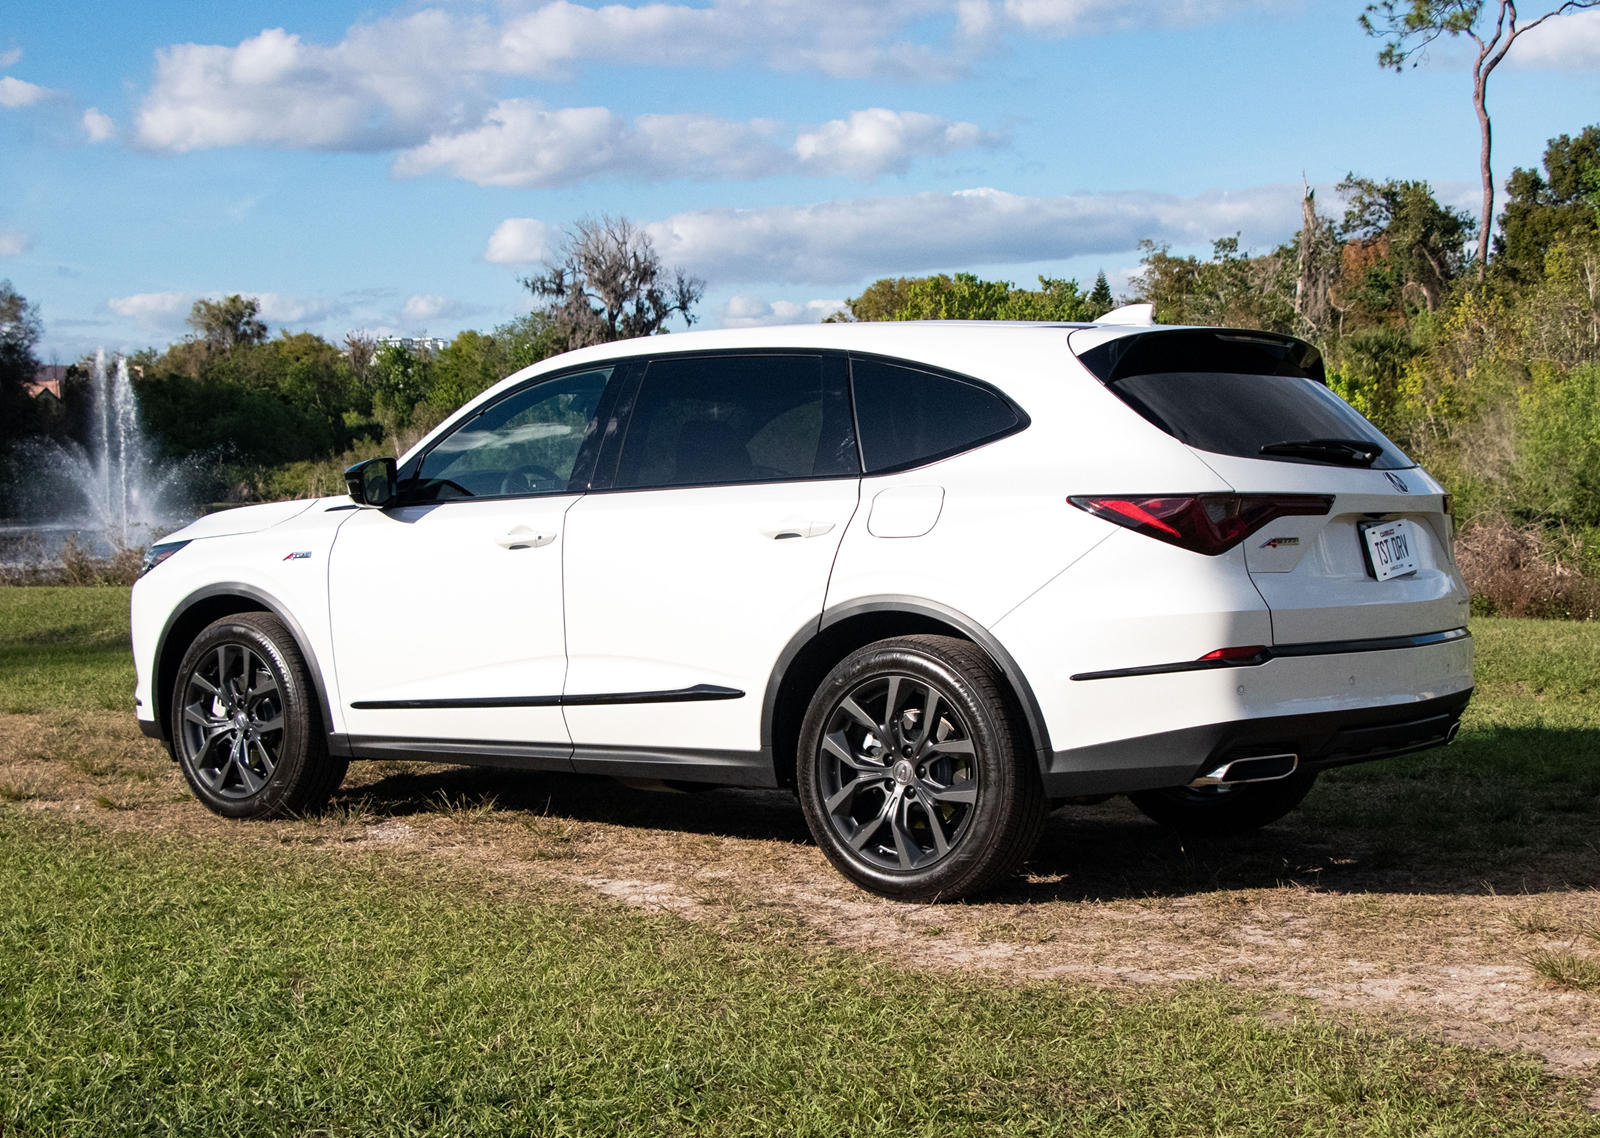 Is Acura Mdx A Good Reliable Car?